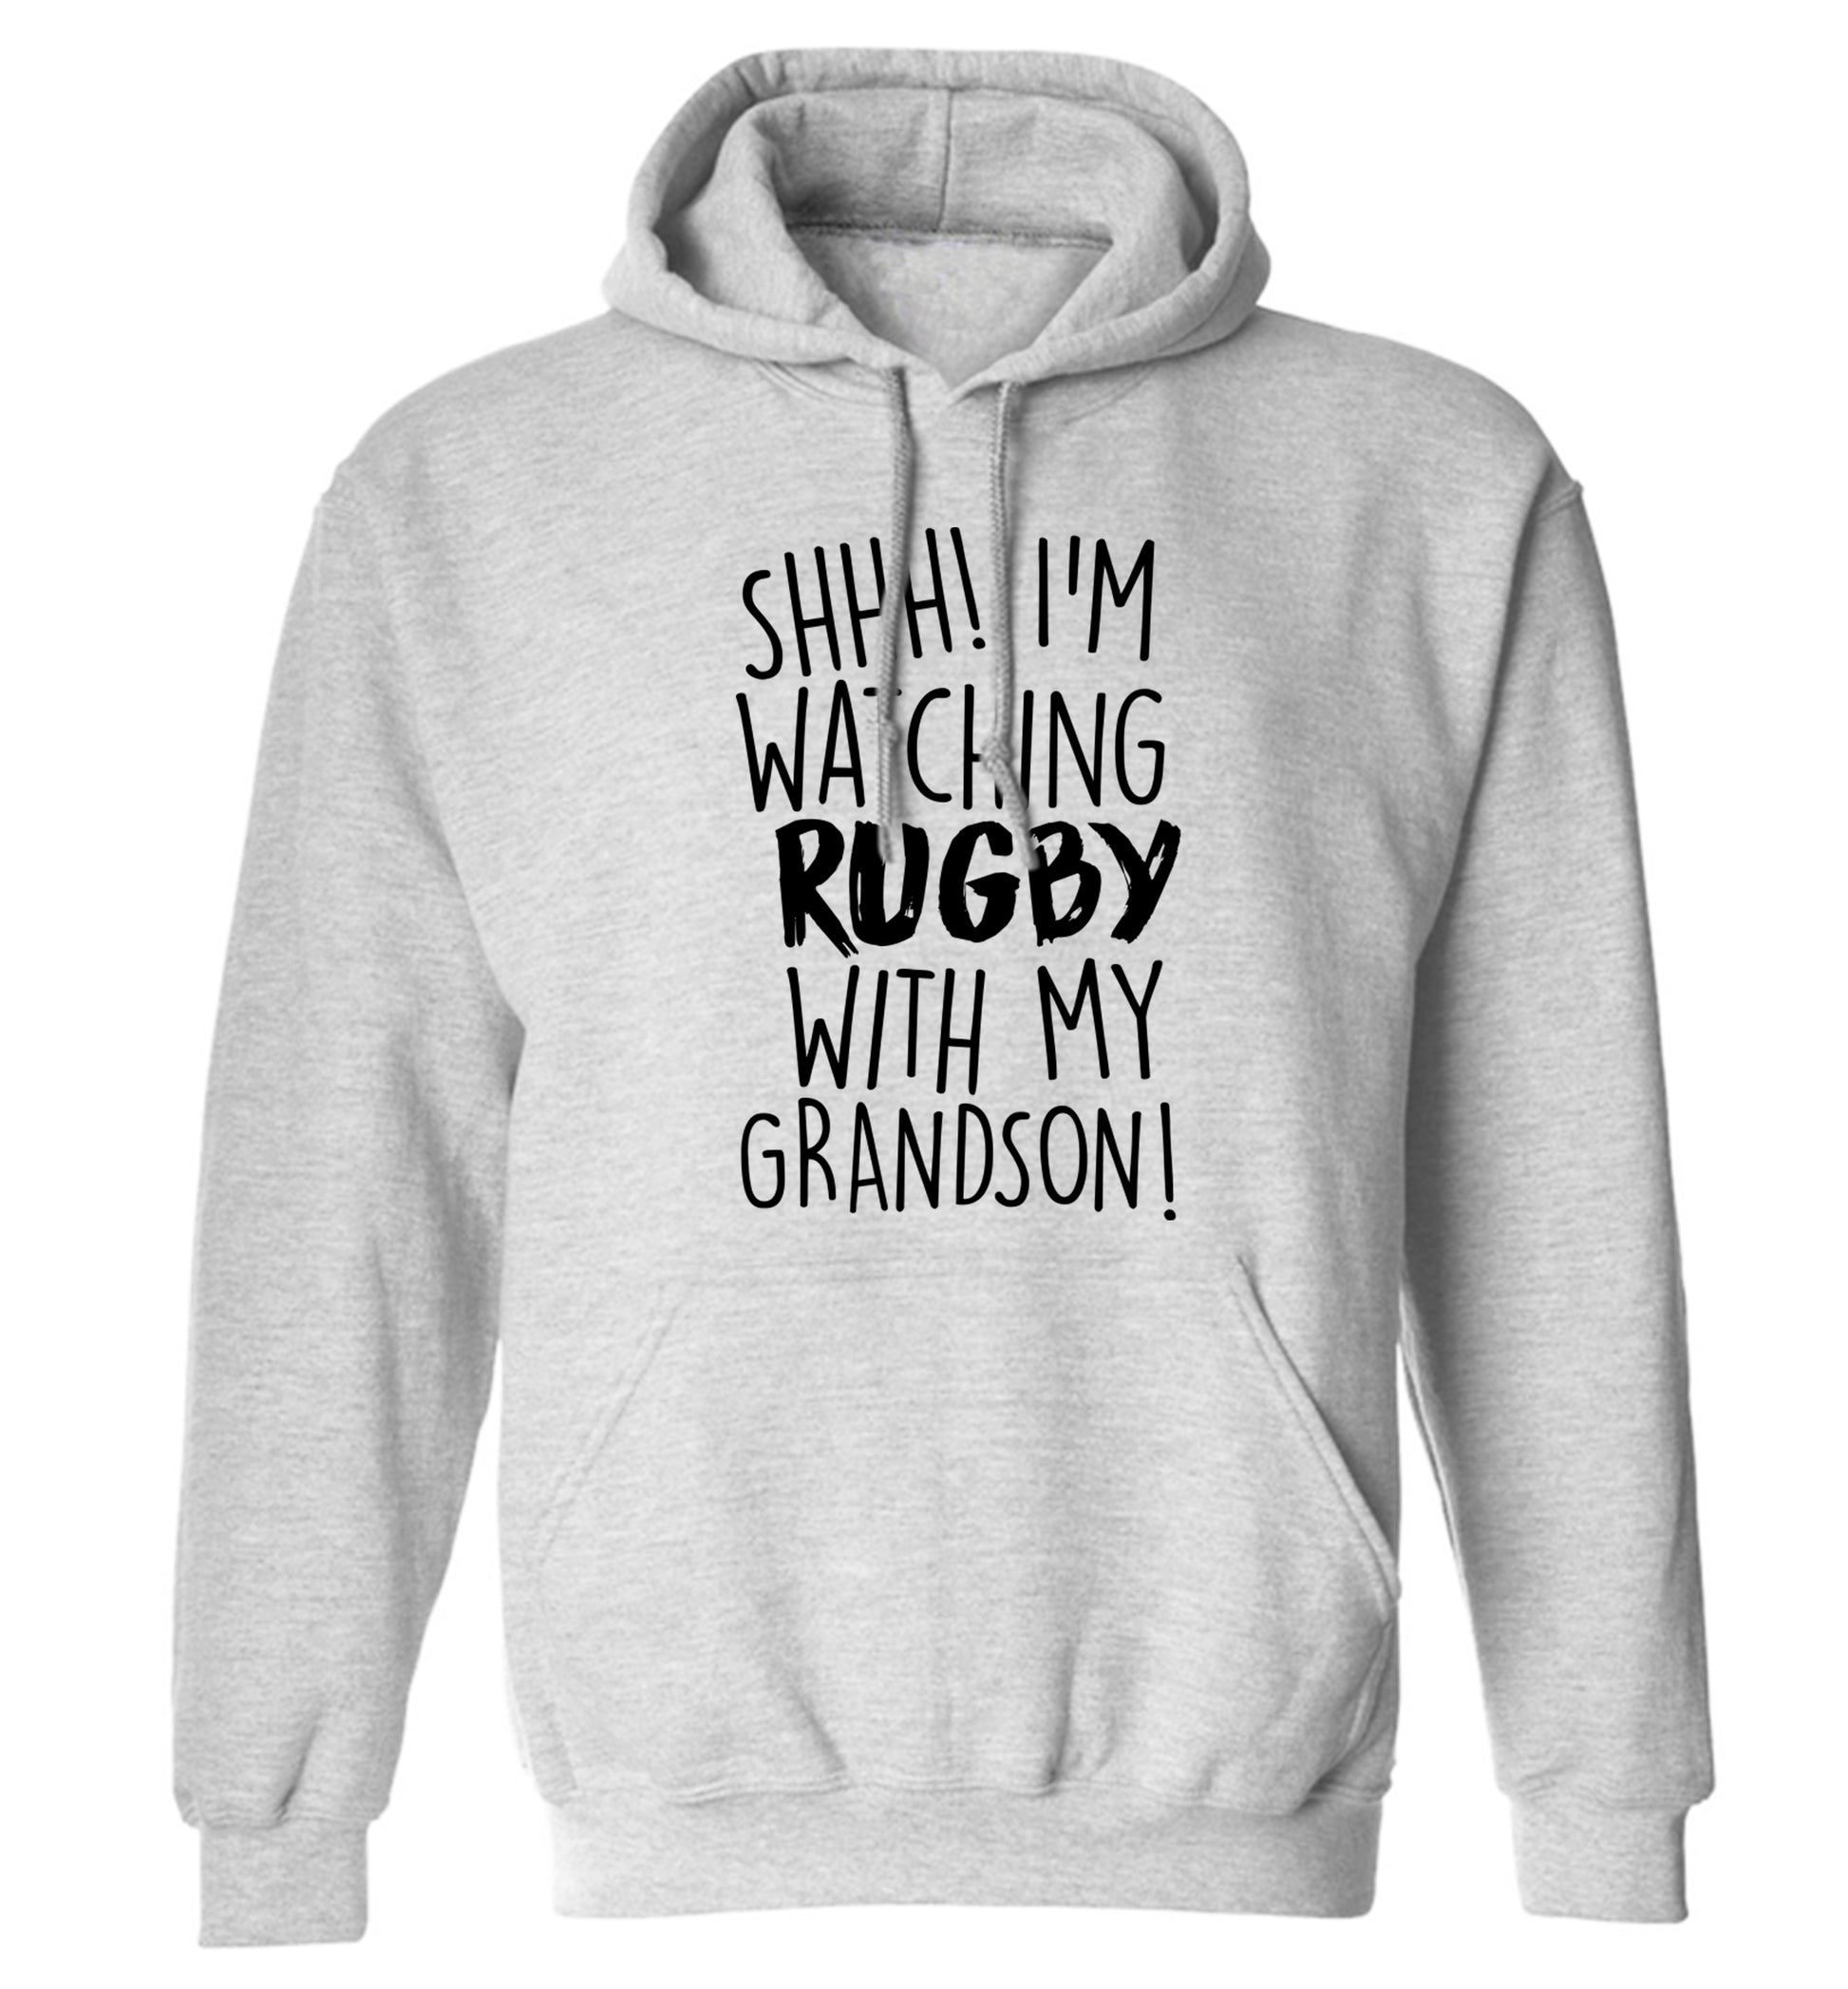 Shh I'm watching rugby with my grandson adults unisex grey hoodie 2XL